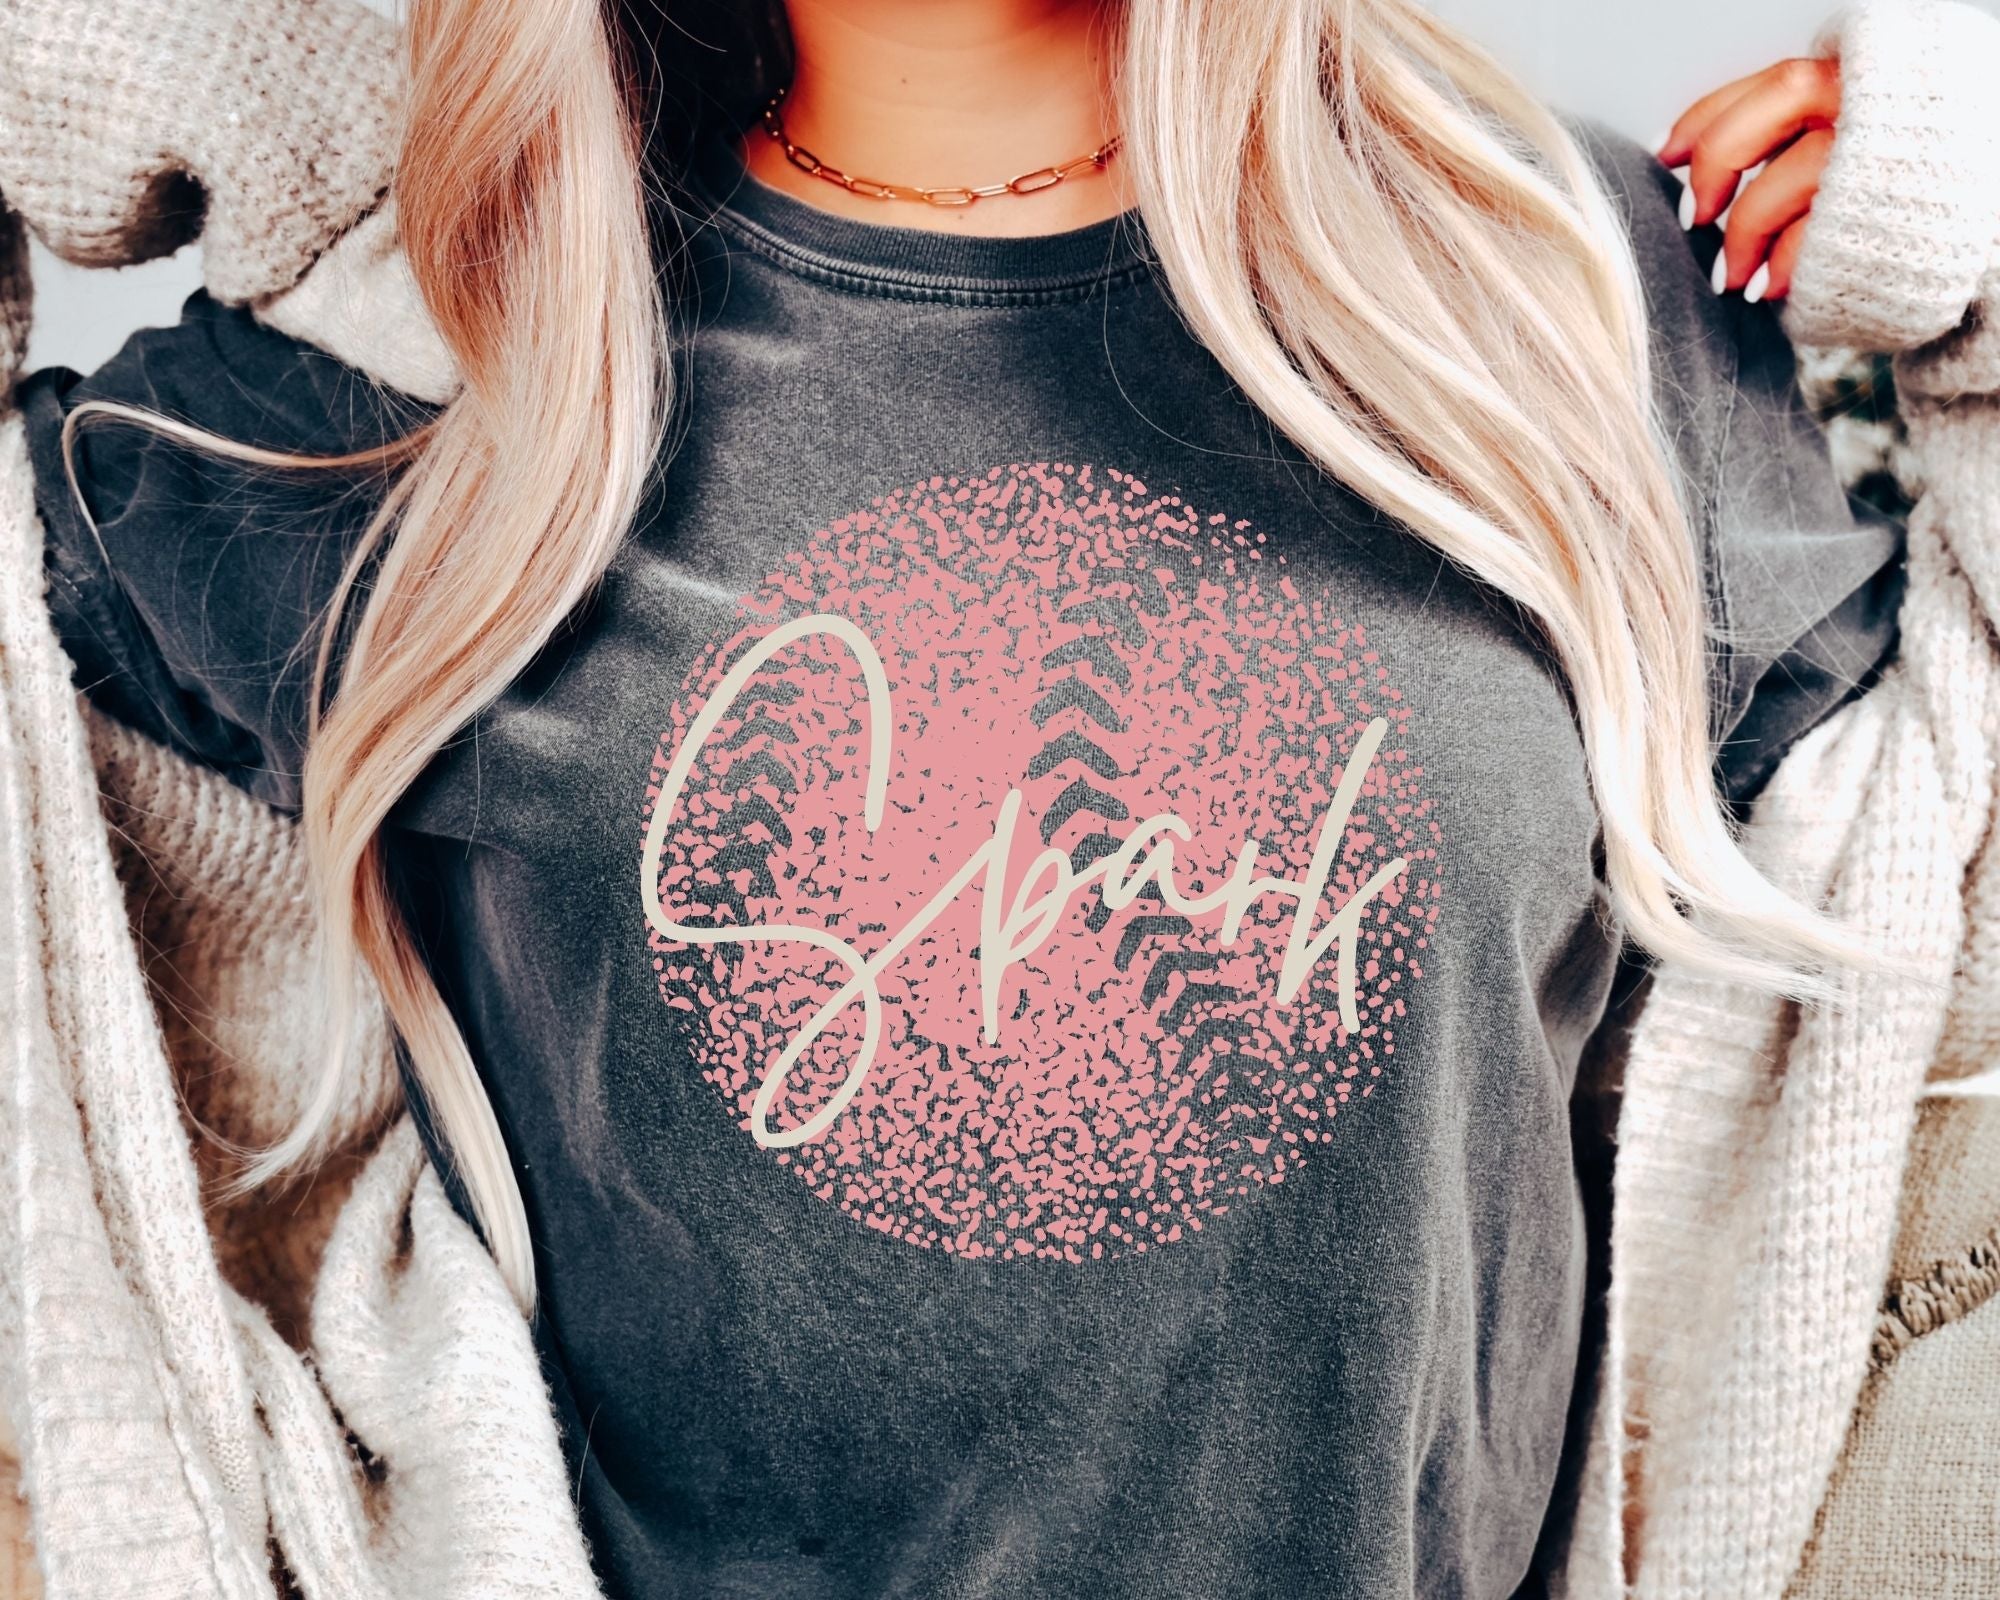 Personalized Faded Softball Tee